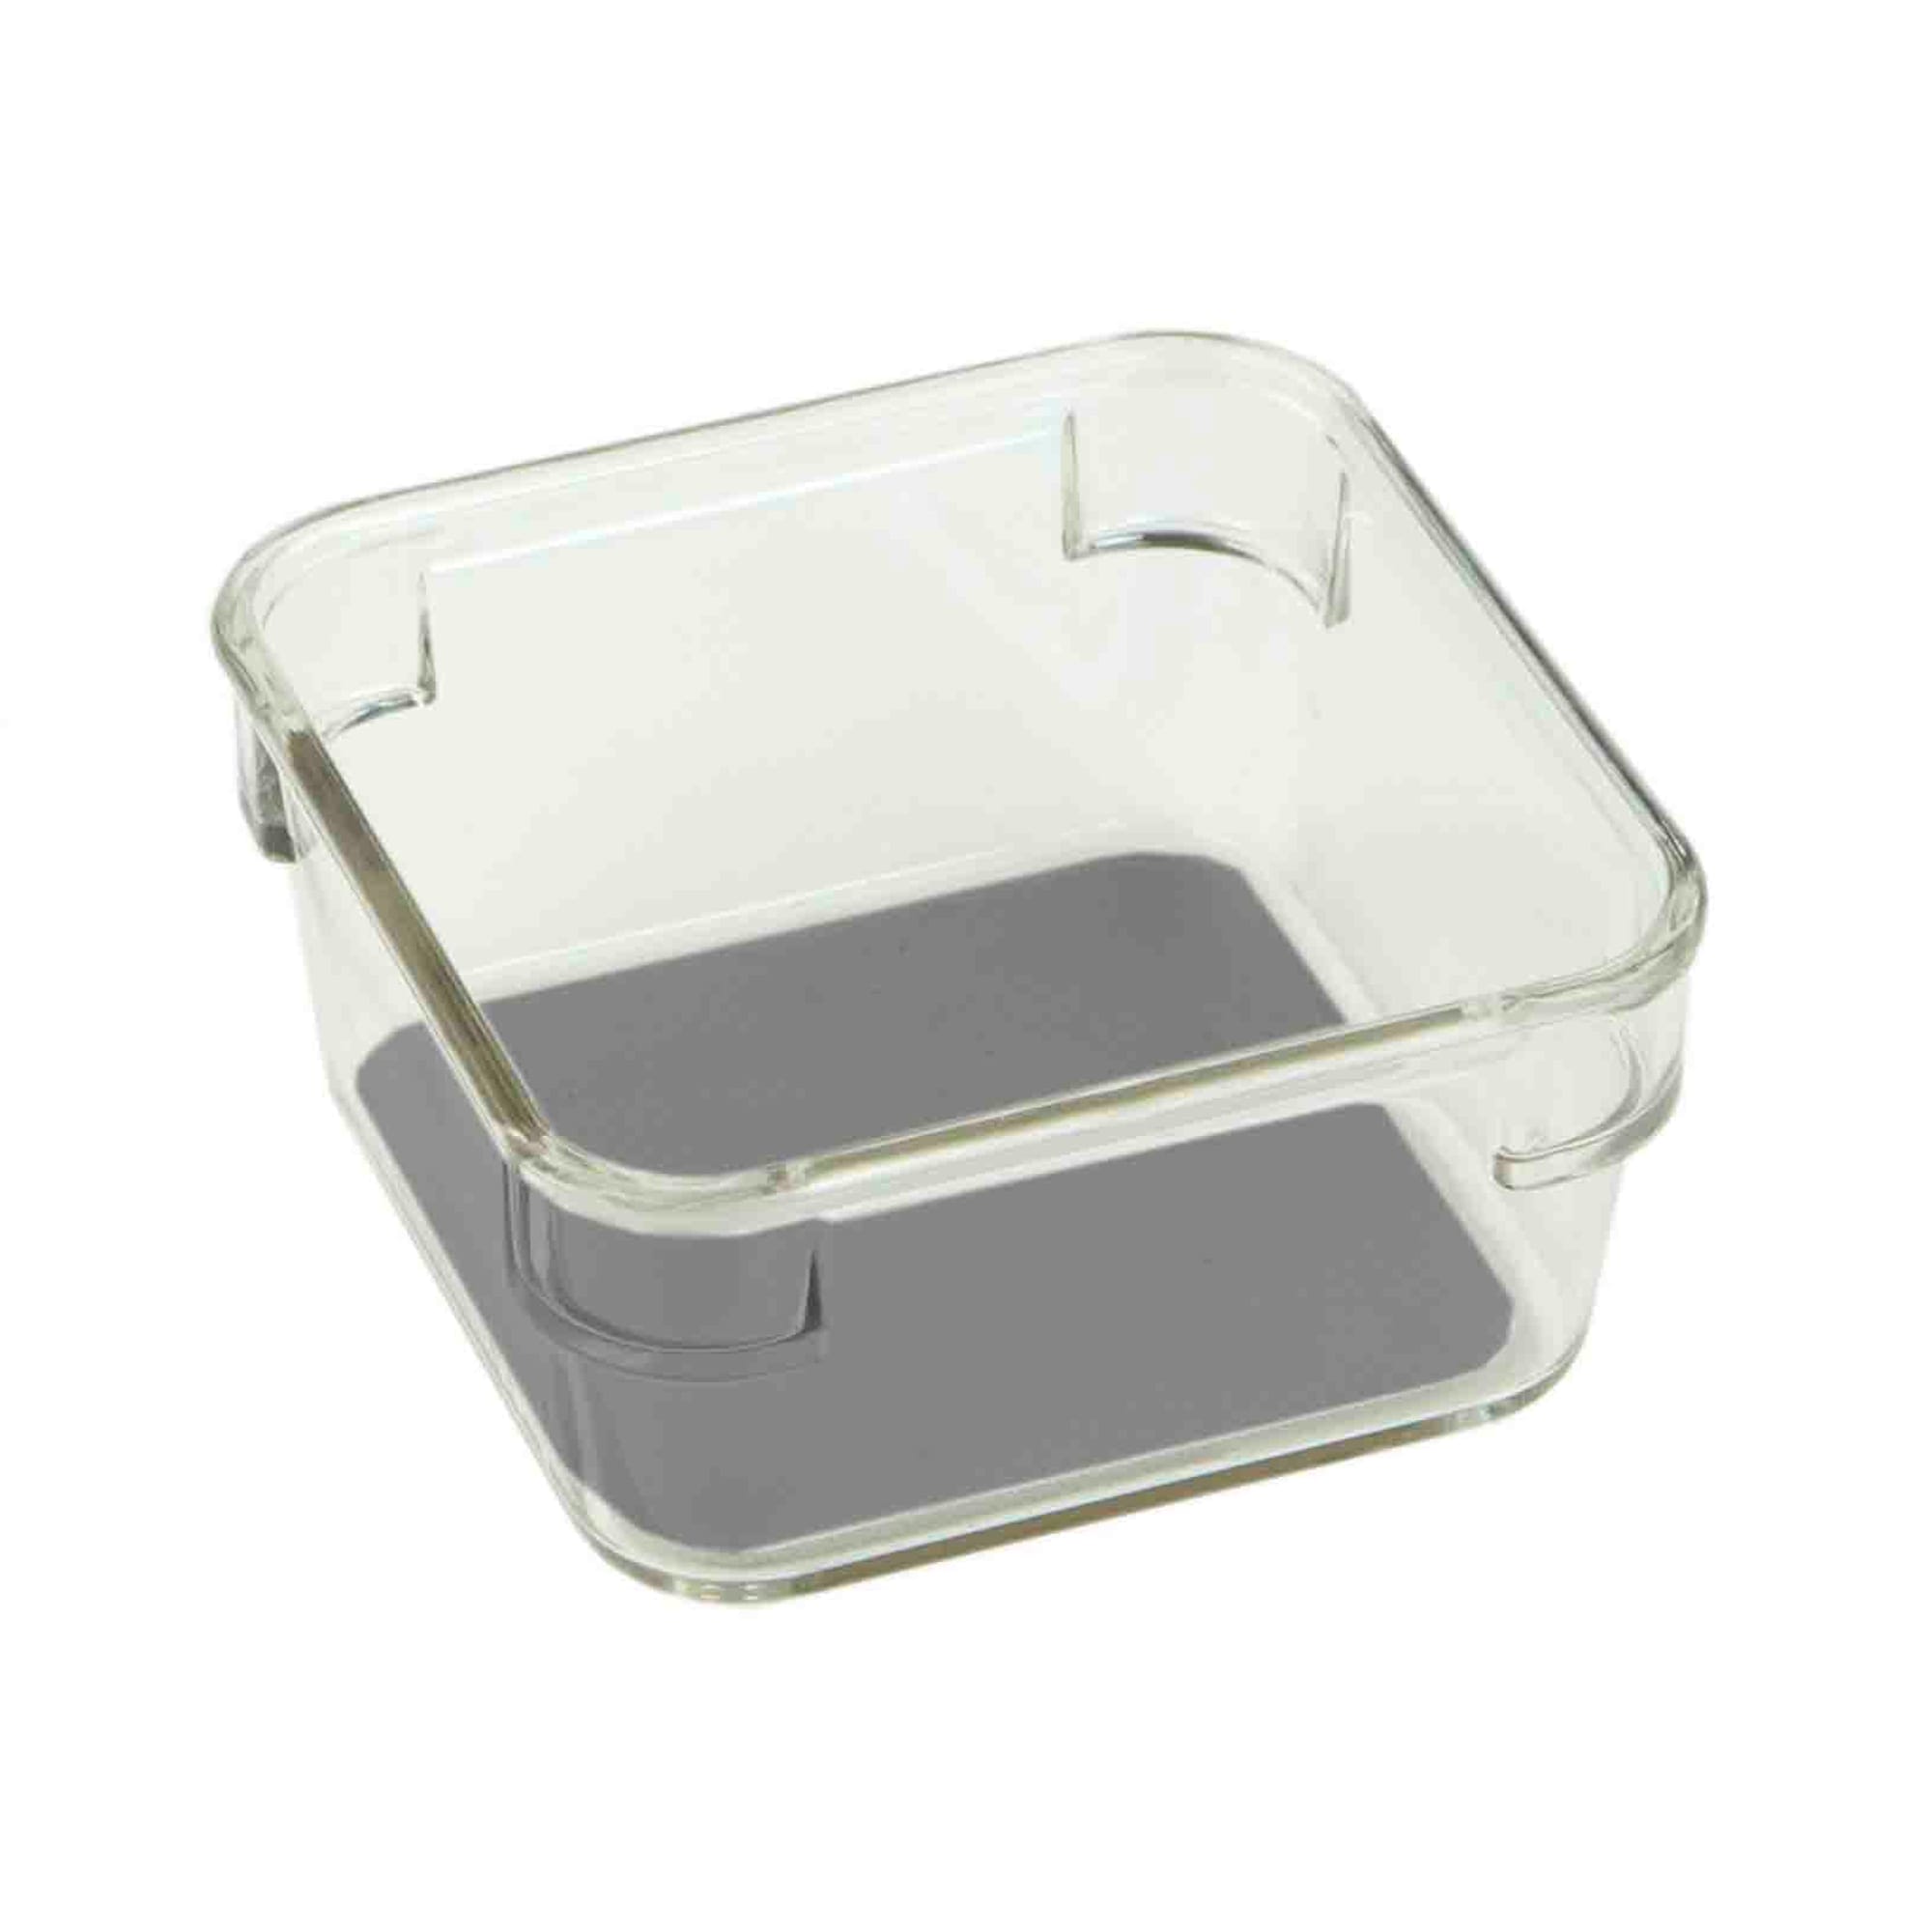 Home Basics 3" x 3" x 2" Plastic Drawer Organizer with Rubber Liner $1.00 EACH, CASE PACK OF 24